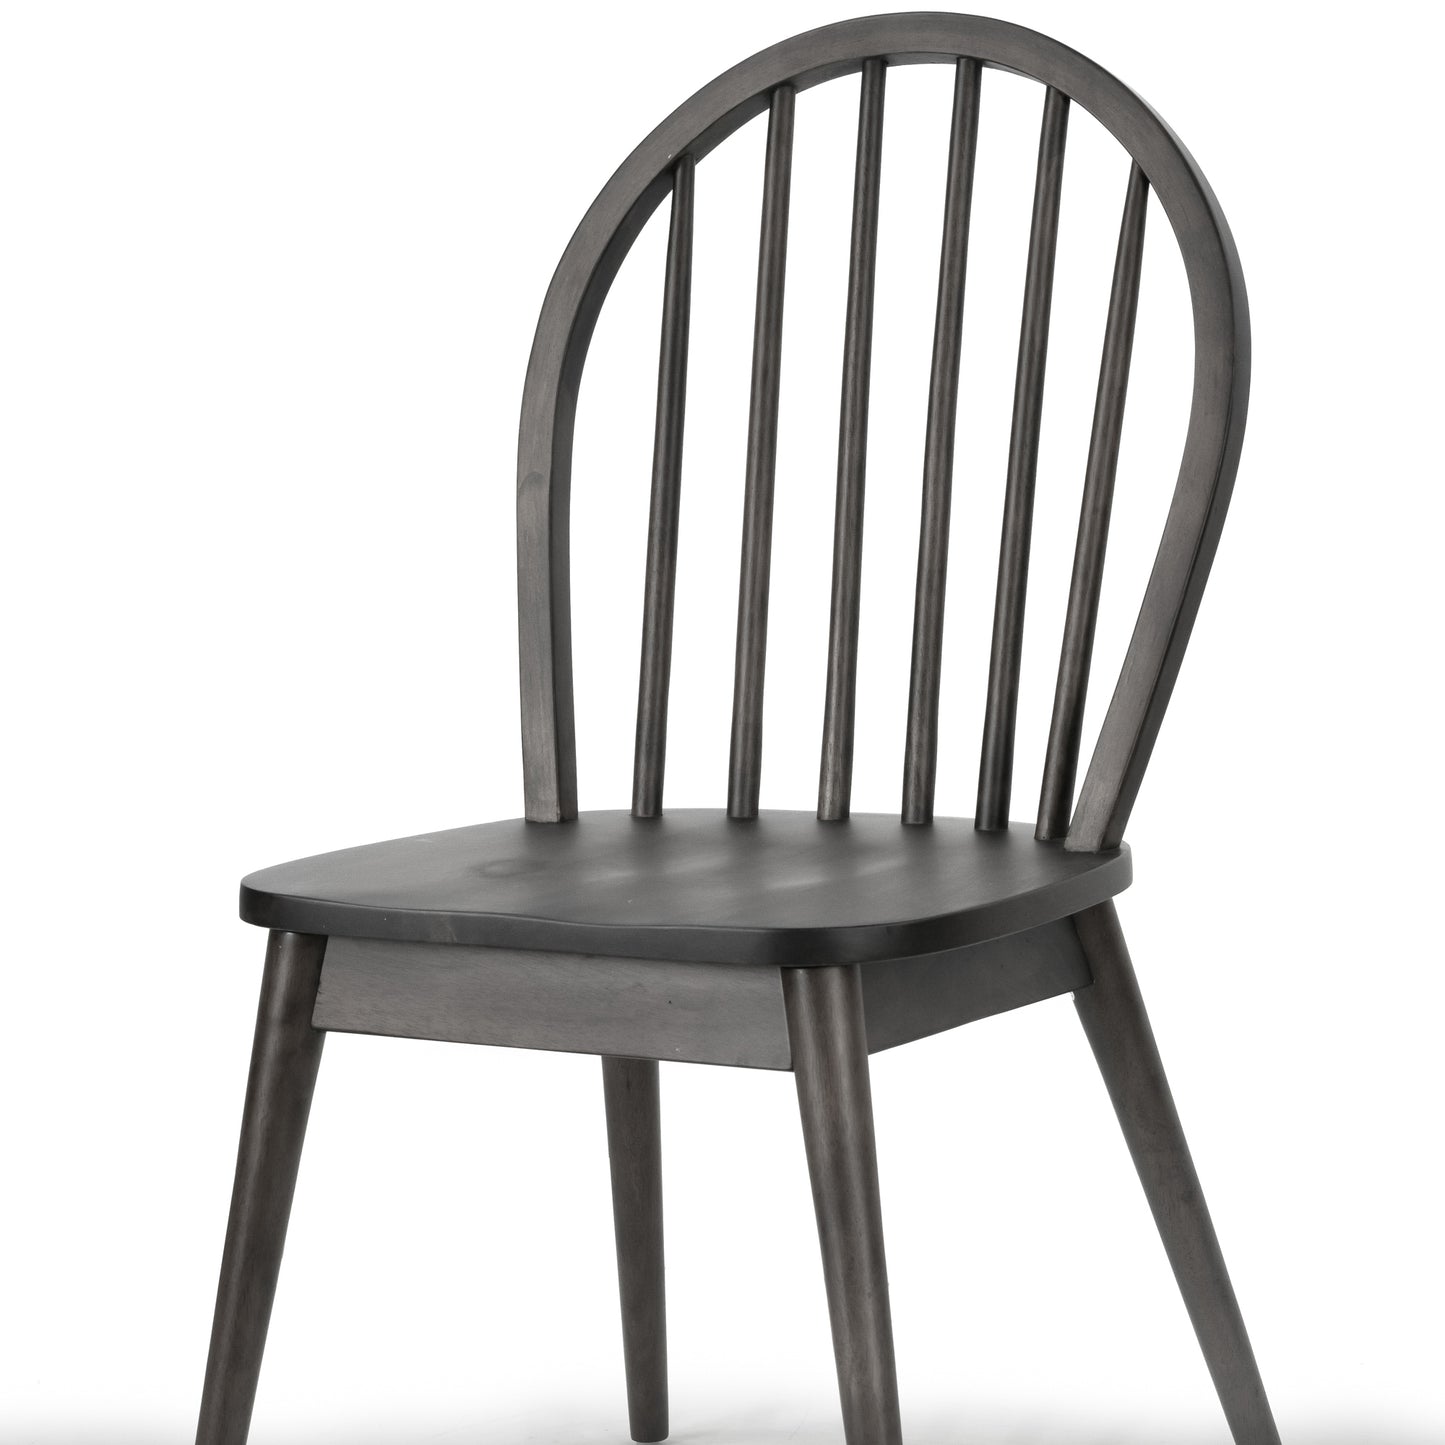 Set of 2 Astra Black Solid Wood Chair with Windsor Back